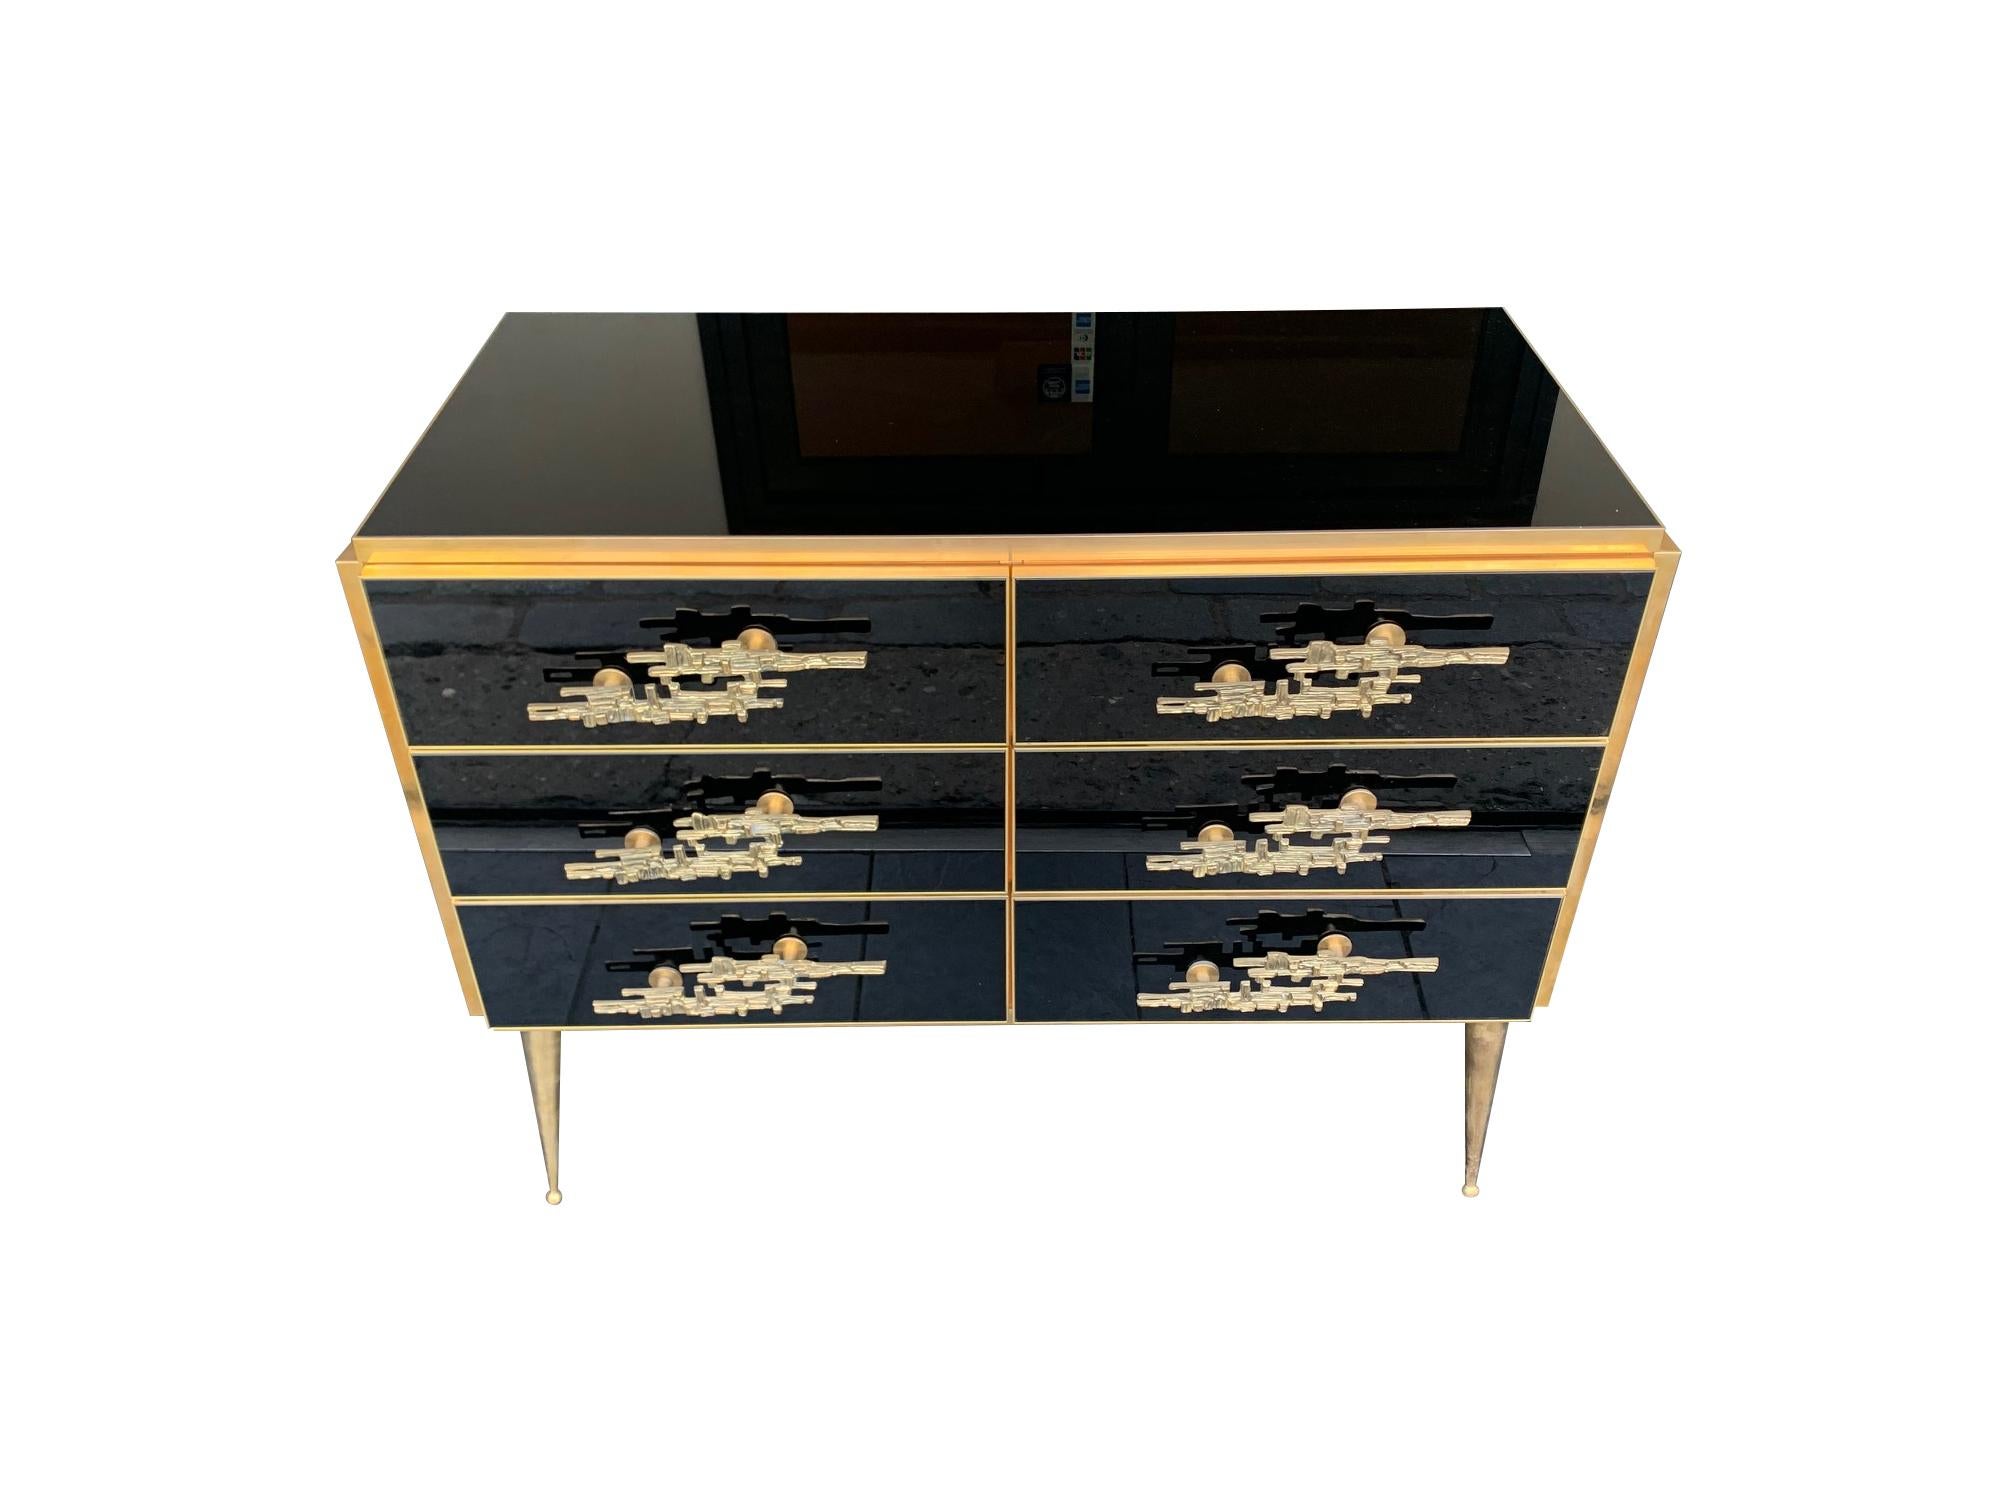 An Italian black glass and solid brass chest of drawers with six drawers with a solid wood interior and stunning Brutalist brass handles. The chest is mounted on 1950s style pointed brass legs. 

This piece in the listing is available to buy now,